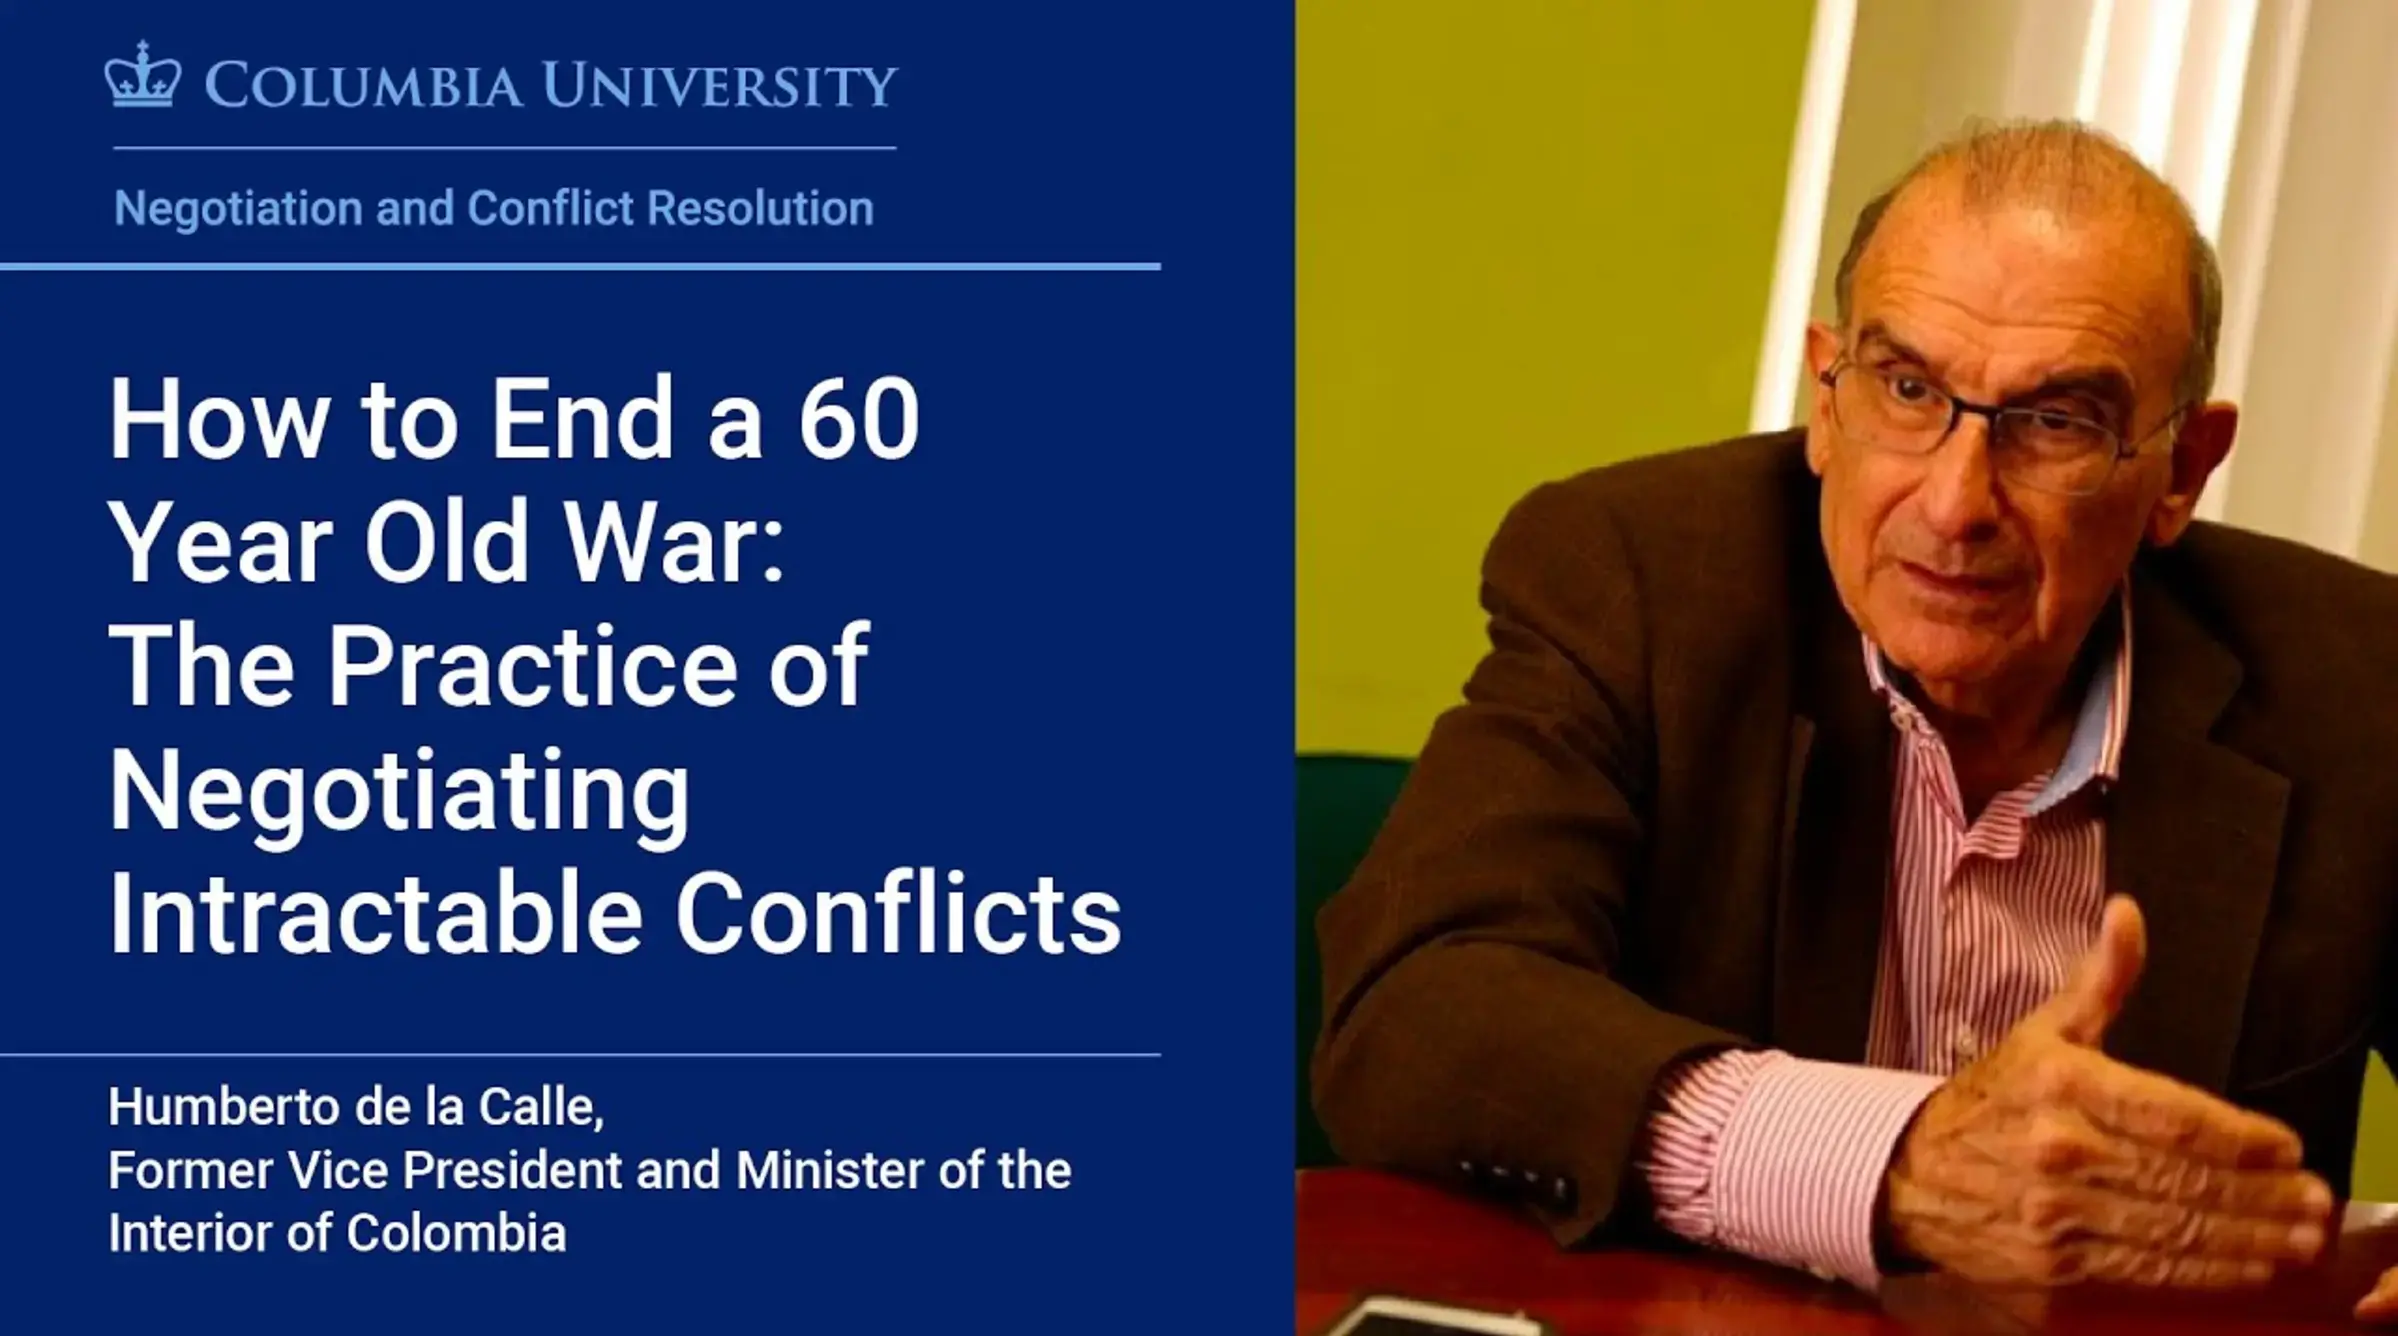 How to End a 60 Year Old War: The Practice of Negotiating Intractable Conflicts